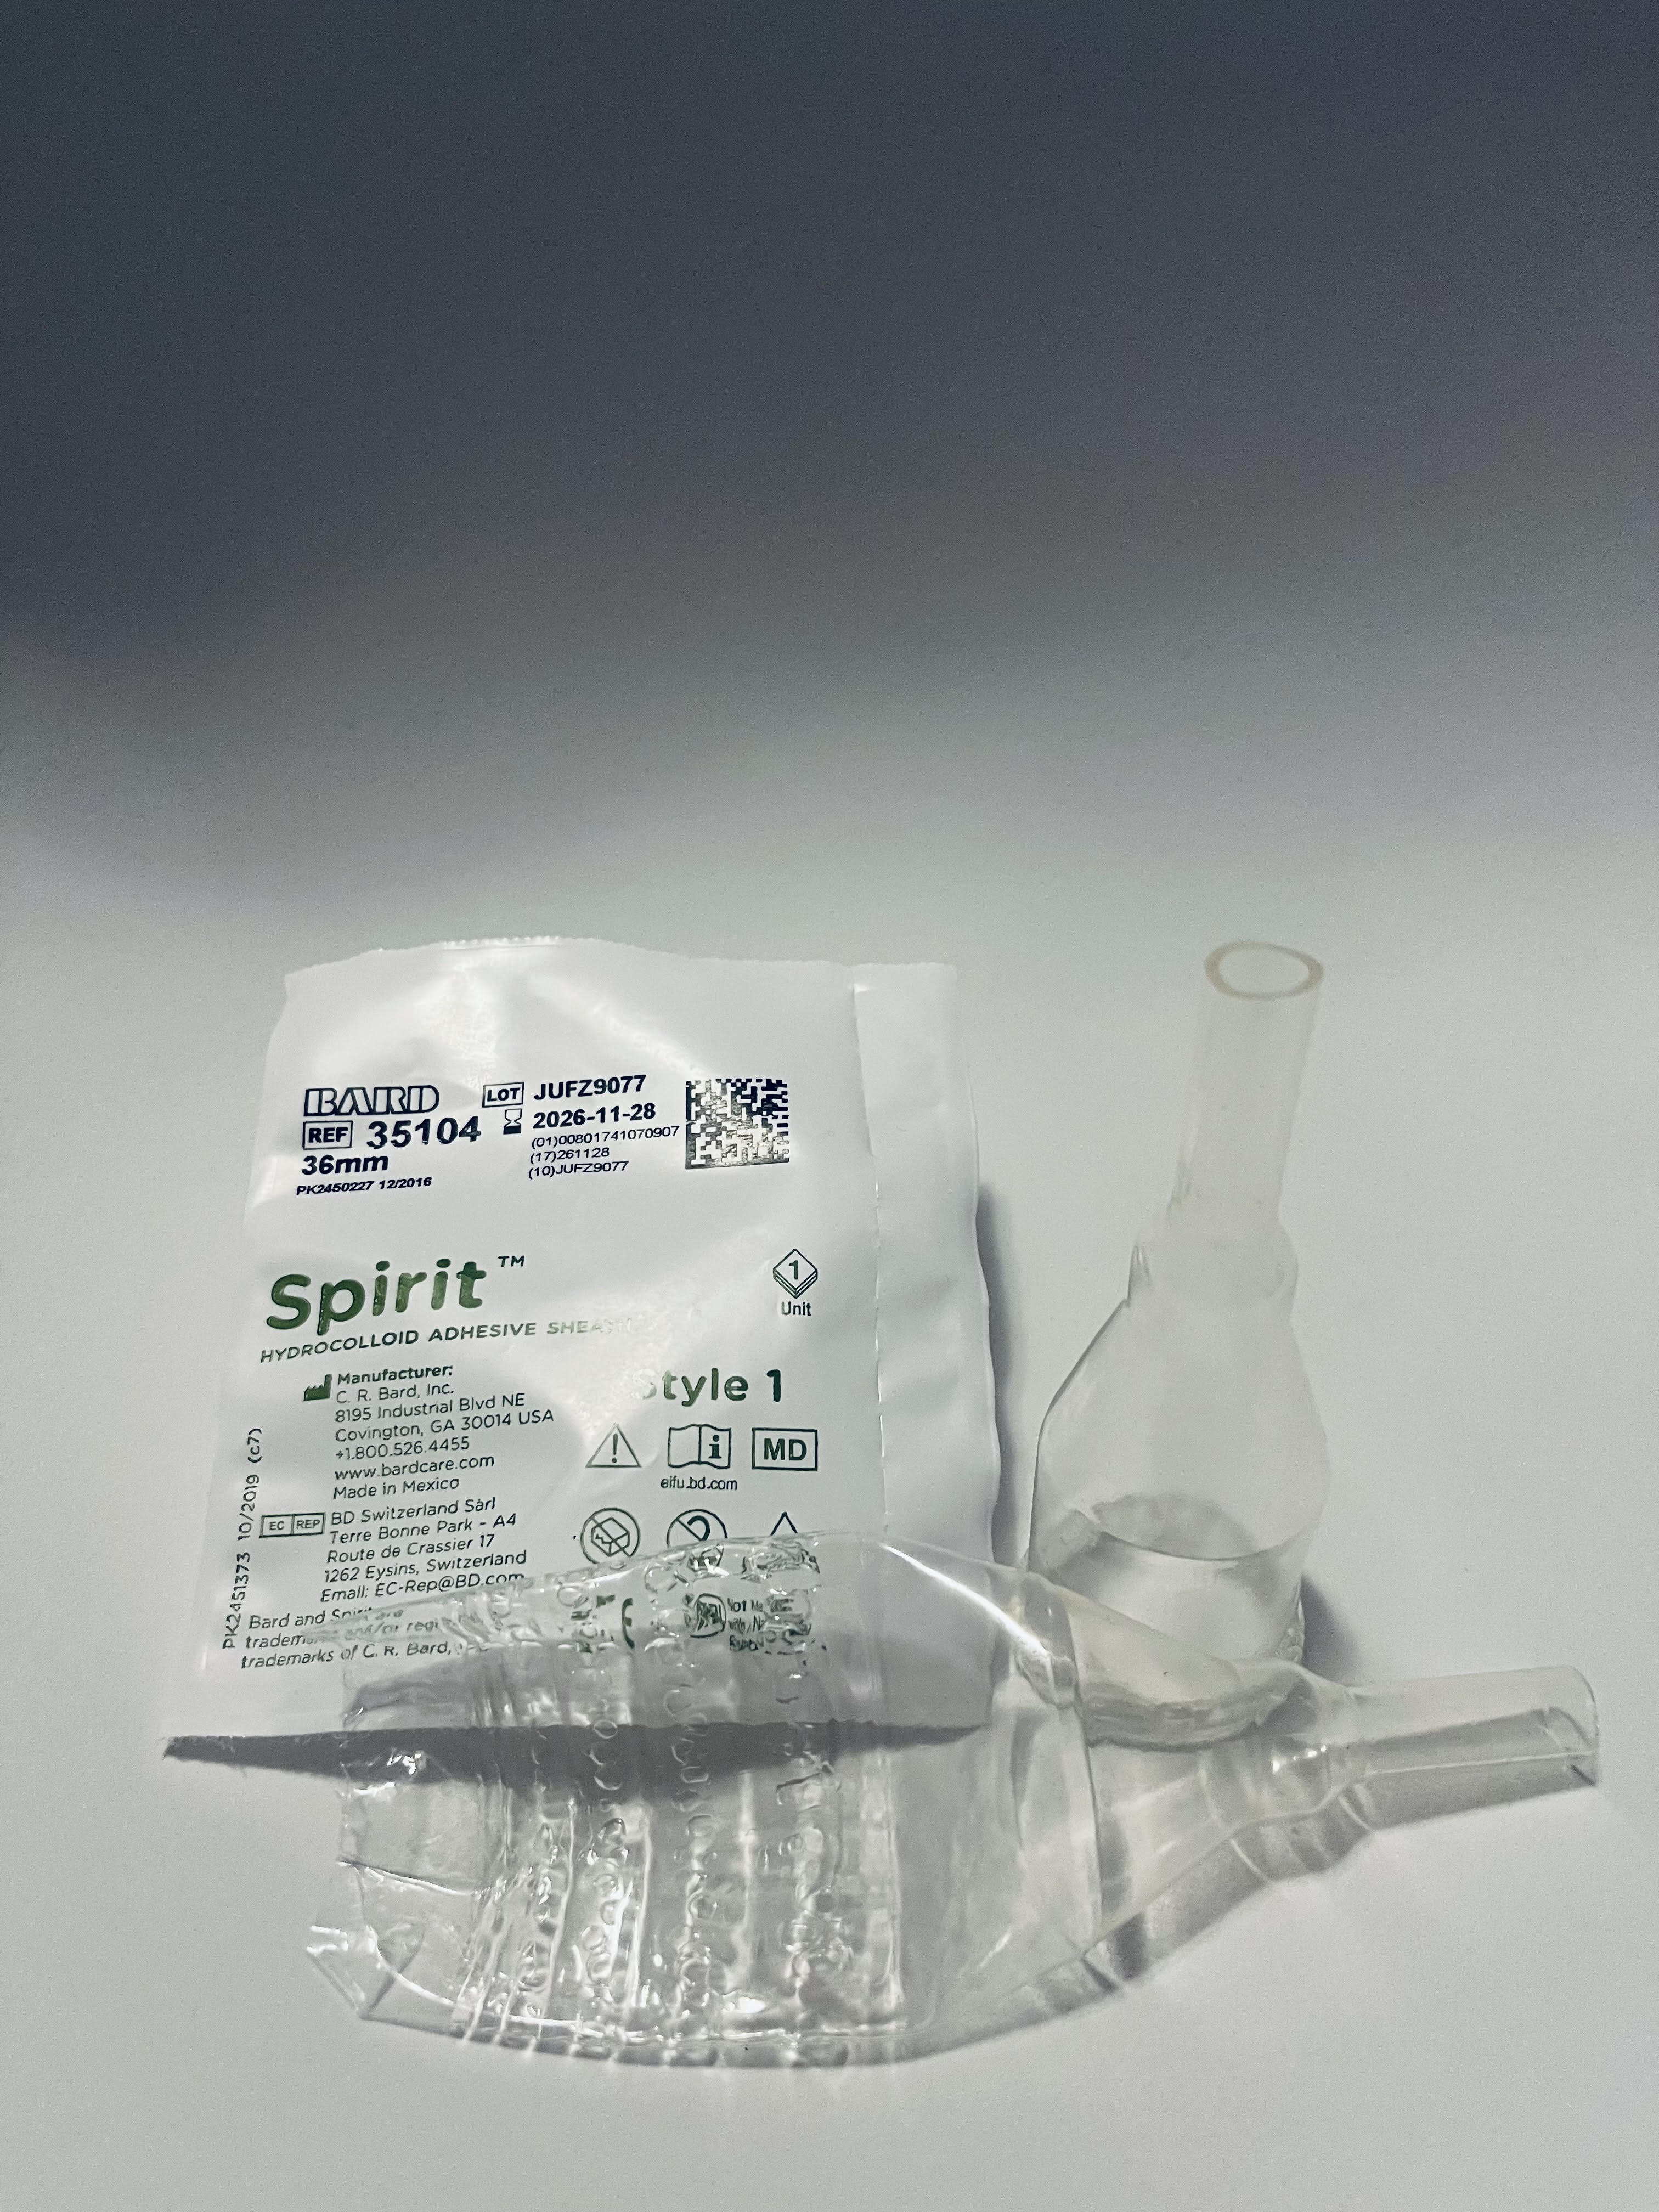 Urinary Kits 1-Week Kits 1-Week Urinary Incontinence  Kit (36mm Spirit-1) by Veteran Medical Supplies online store selling catheters, drainage bags, urinary kits centrally located in Kansas City Missouri shipping to the entire United States